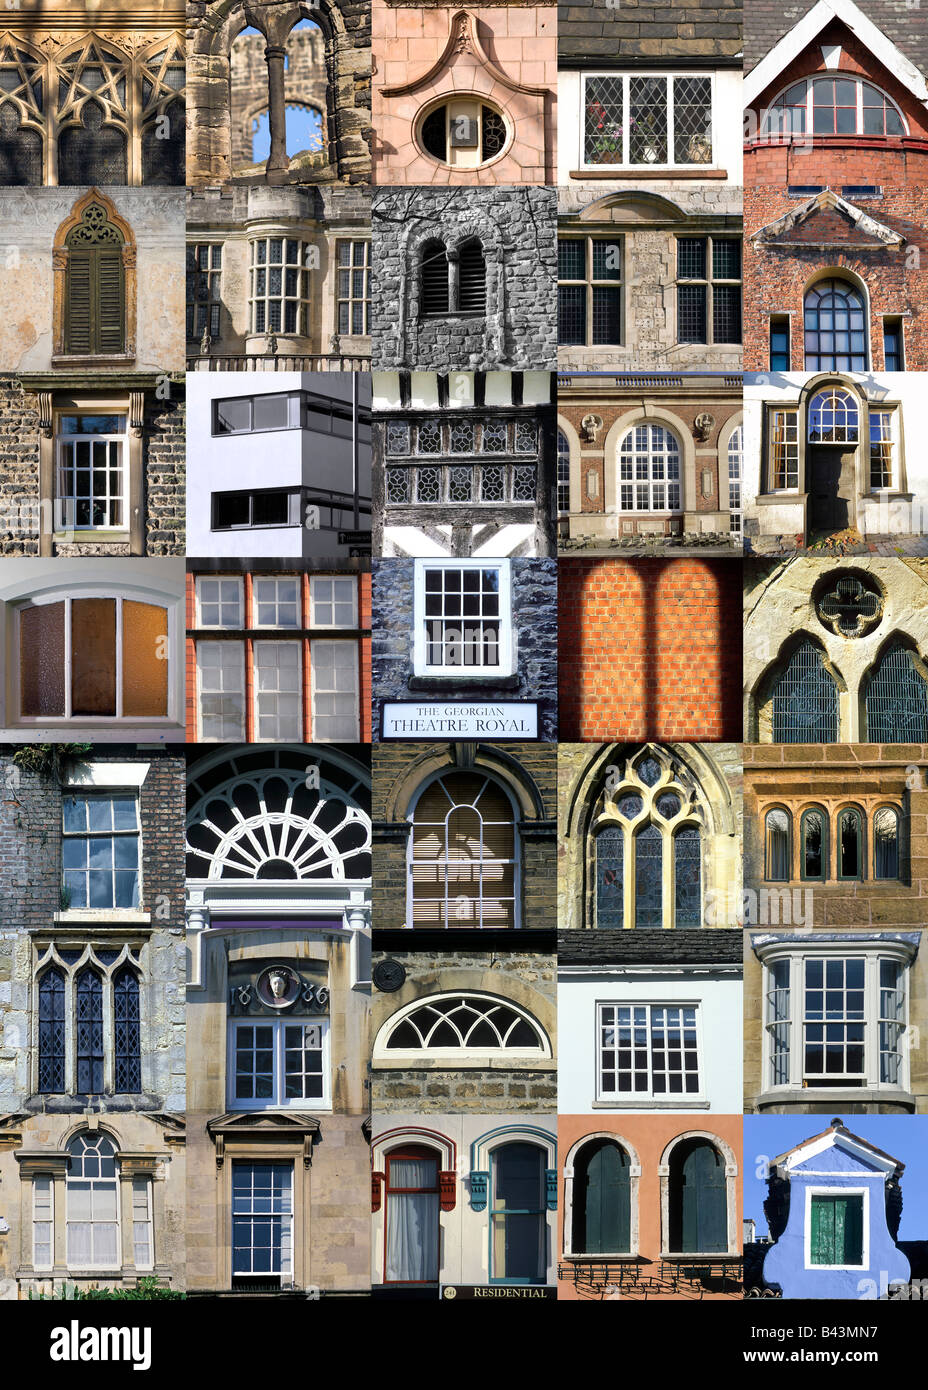 The sheer diversity of architecture and window design over history in